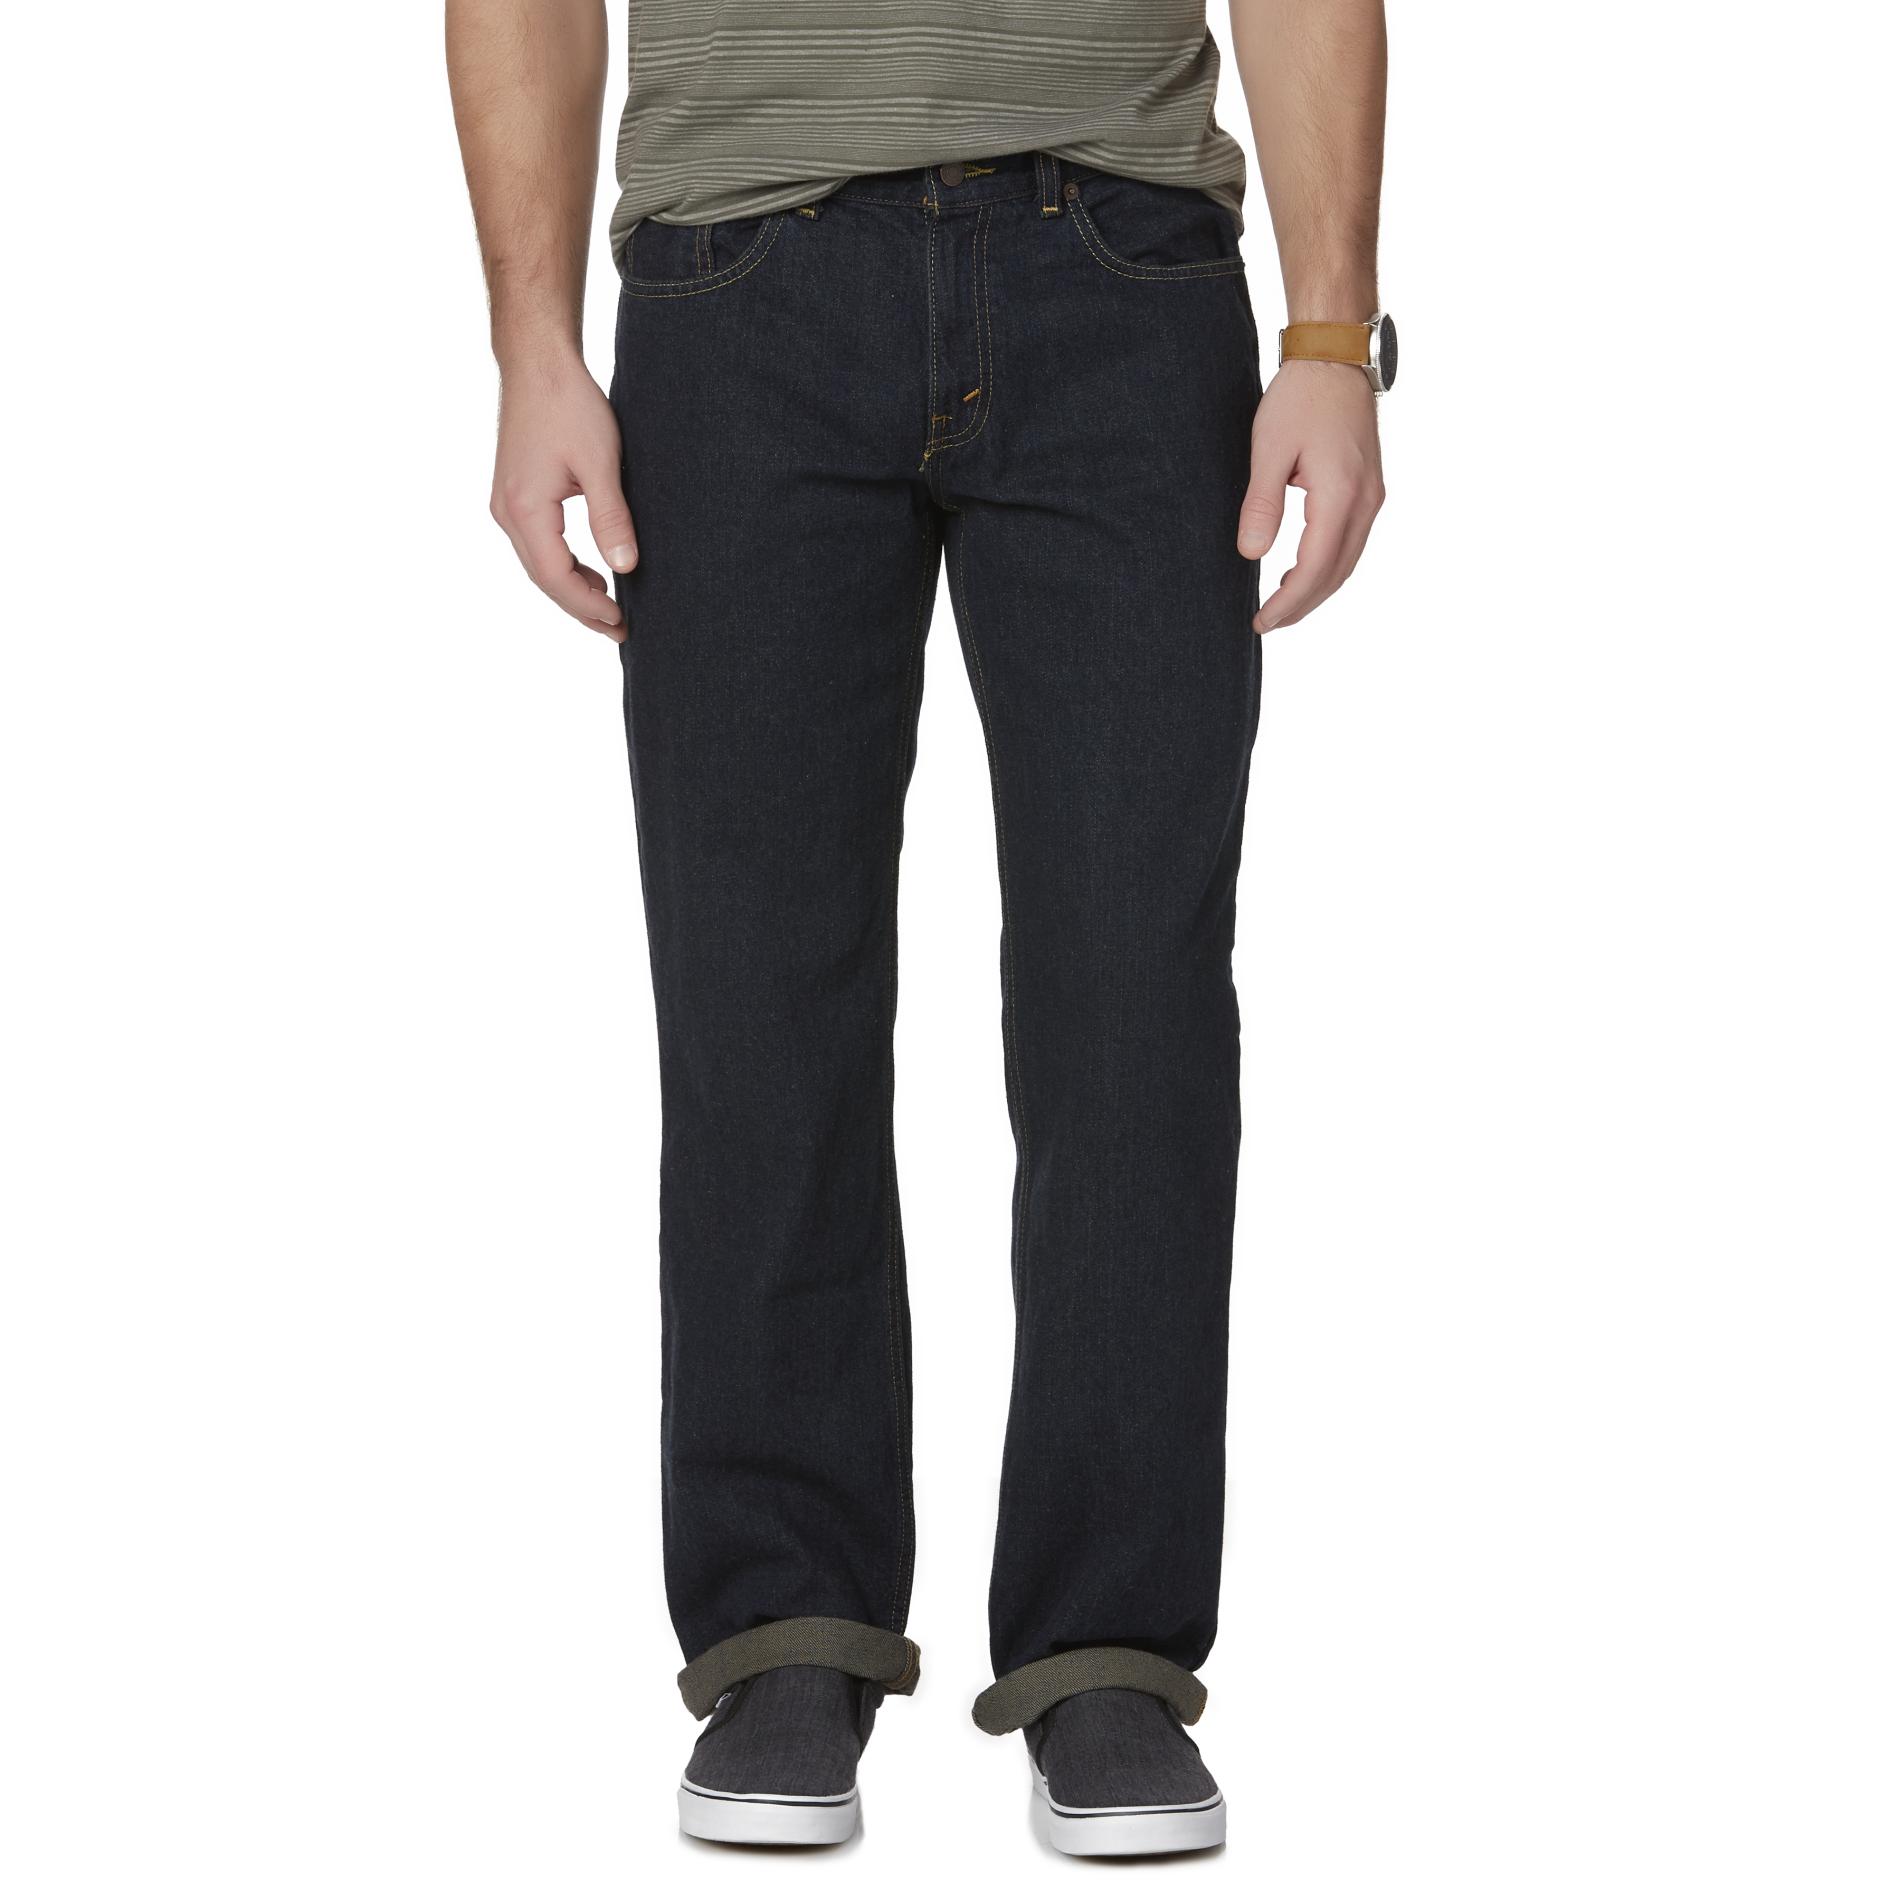 Route 66 Men's Relaxed Fit Jeans